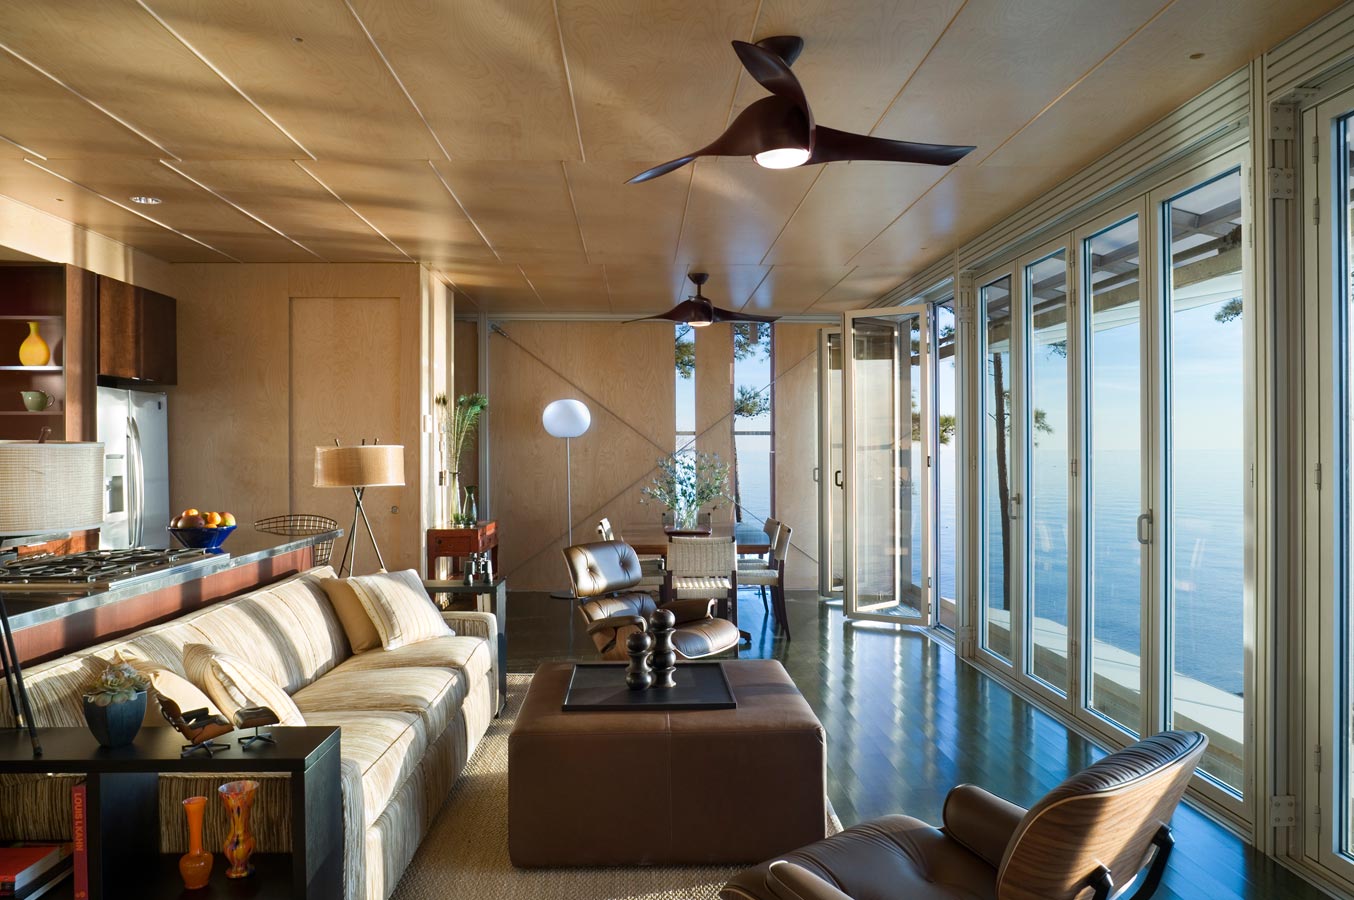 <p>The main living and dining area can allow abundant daylight and seamless views to the bay with the hangar doors fully open. <br><small>&copy; Peter Aaron/OTTO</small></p>